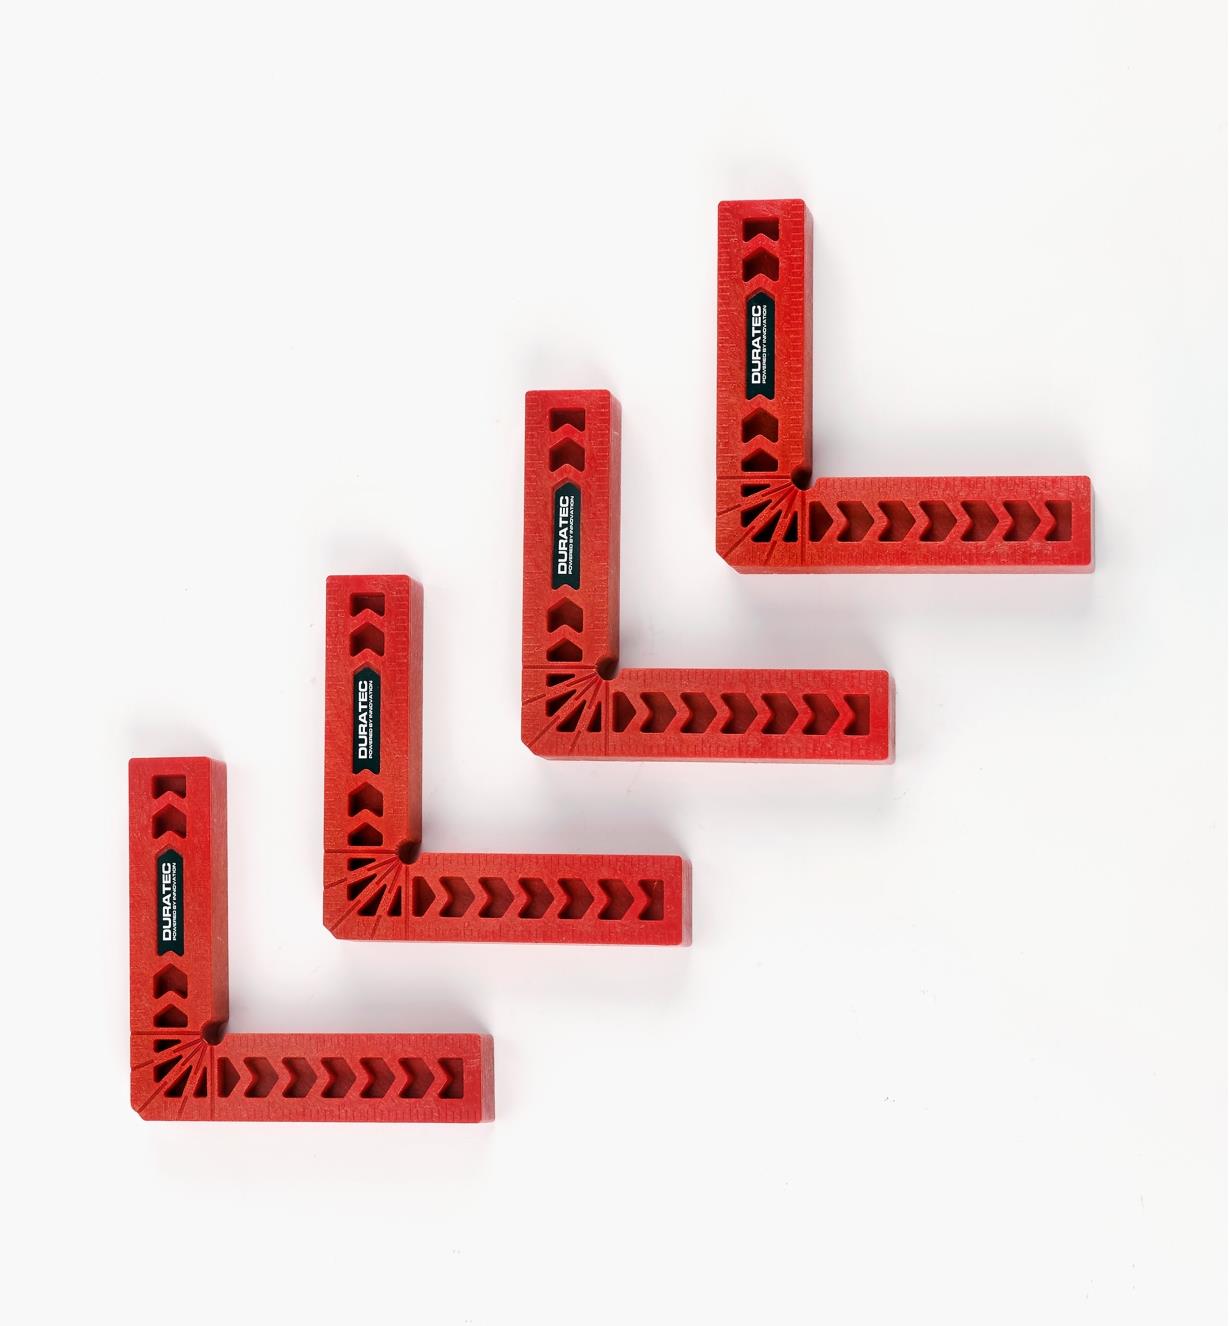 03F0314 - 4" Clamping Squares, set of 4